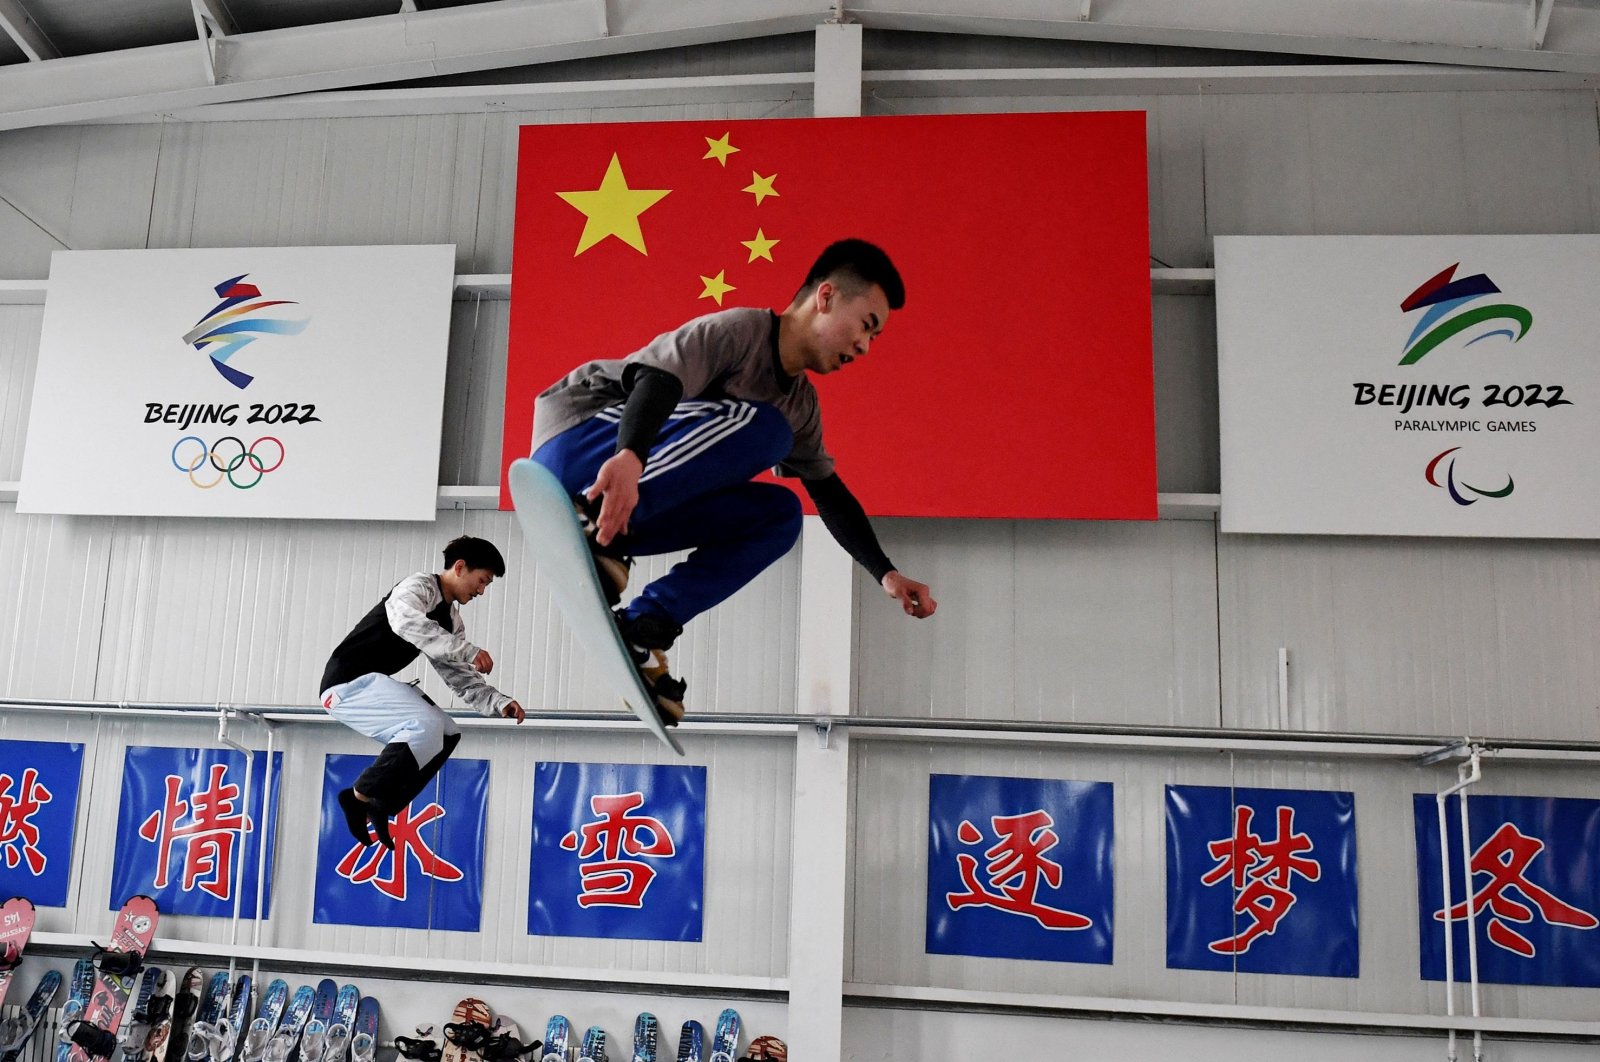 Students train at a Youth Winter Olympic Sports School in Zhangjiakou, northern China, March 18, 2021. (AFP Photo) 